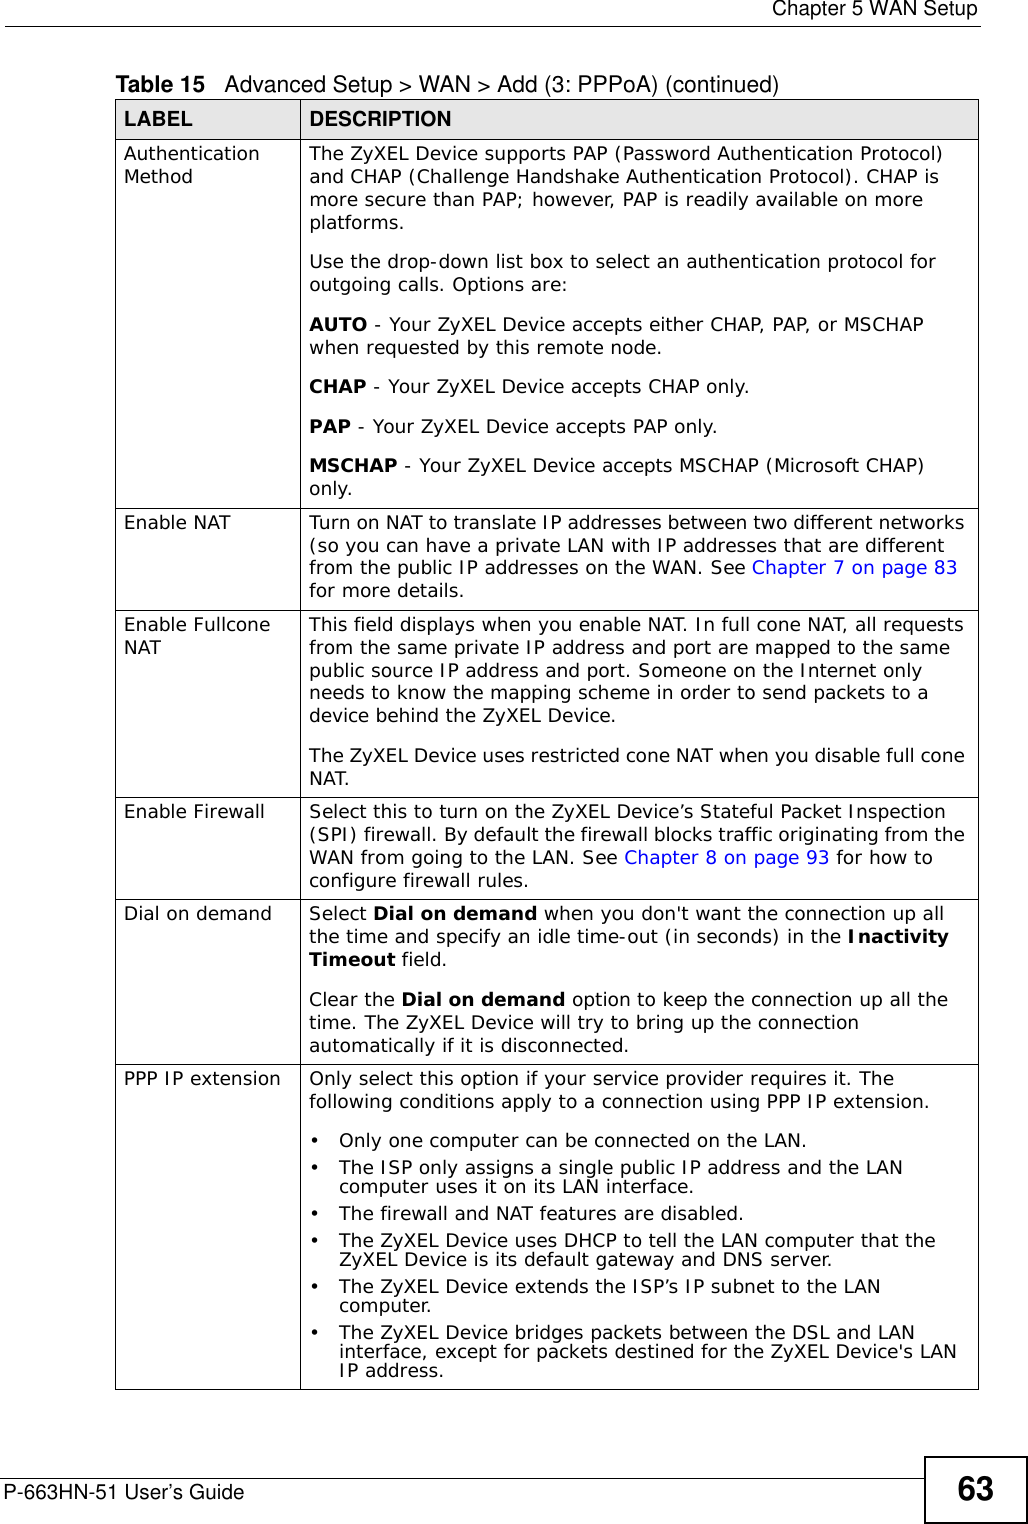  Chapter 5 WAN SetupP-663HN-51 User’s Guide 63Authentication Method The ZyXEL Device supports PAP (Password Authentication Protocol) and CHAP (Challenge Handshake Authentication Protocol). CHAP is more secure than PAP; however, PAP is readily available on more platforms.Use the drop-down list box to select an authentication protocol for outgoing calls. Options are:AUTO - Your ZyXEL Device accepts either CHAP, PAP, or MSCHAP when requested by this remote node. CHAP - Your ZyXEL Device accepts CHAP only. PAP - Your ZyXEL Device accepts PAP only. MSCHAP - Your ZyXEL Device accepts MSCHAP (Microsoft CHAP) only. Enable NAT Turn on NAT to translate IP addresses between two different networks (so you can have a private LAN with IP addresses that are different from the public IP addresses on the WAN. See Chapter 7 on page 83 for more details.Enable Fullcone NAT This field displays when you enable NAT. In full cone NAT, all requests from the same private IP address and port are mapped to the same public source IP address and port. Someone on the Internet only needs to know the mapping scheme in order to send packets to a device behind the ZyXEL Device.The ZyXEL Device uses restricted cone NAT when you disable full cone NAT.Enable Firewall Select this to turn on the ZyXEL Device’s Stateful Packet Inspection (SPI) firewall. By default the firewall blocks traffic originating from the WAN from going to the LAN. See Chapter 8 on page 93 for how to configure firewall rules.Dial on demand Select Dial on demand when you don&apos;t want the connection up all the time and specify an idle time-out (in seconds) in the Inactivity Timeout field. Clear the Dial on demand option to keep the connection up all the time. The ZyXEL Device will try to bring up the connection automatically if it is disconnected. PPP IP extension Only select this option if your service provider requires it. The following conditions apply to a connection using PPP IP extension.• Only one computer can be connected on the LAN. • The ISP only assigns a single public IP address and the LAN computer uses it on its LAN interface.  • The firewall and NAT features are disabled. • The ZyXEL Device uses DHCP to tell the LAN computer that the ZyXEL Device is its default gateway and DNS server. • The ZyXEL Device extends the ISP’s IP subnet to the LAN computer. • The ZyXEL Device bridges packets between the DSL and LAN interface, except for packets destined for the ZyXEL Device&apos;s LAN IP address. Table 15   Advanced Setup &gt; WAN &gt; Add (3: PPPoA) (continued)LABEL DESCRIPTION